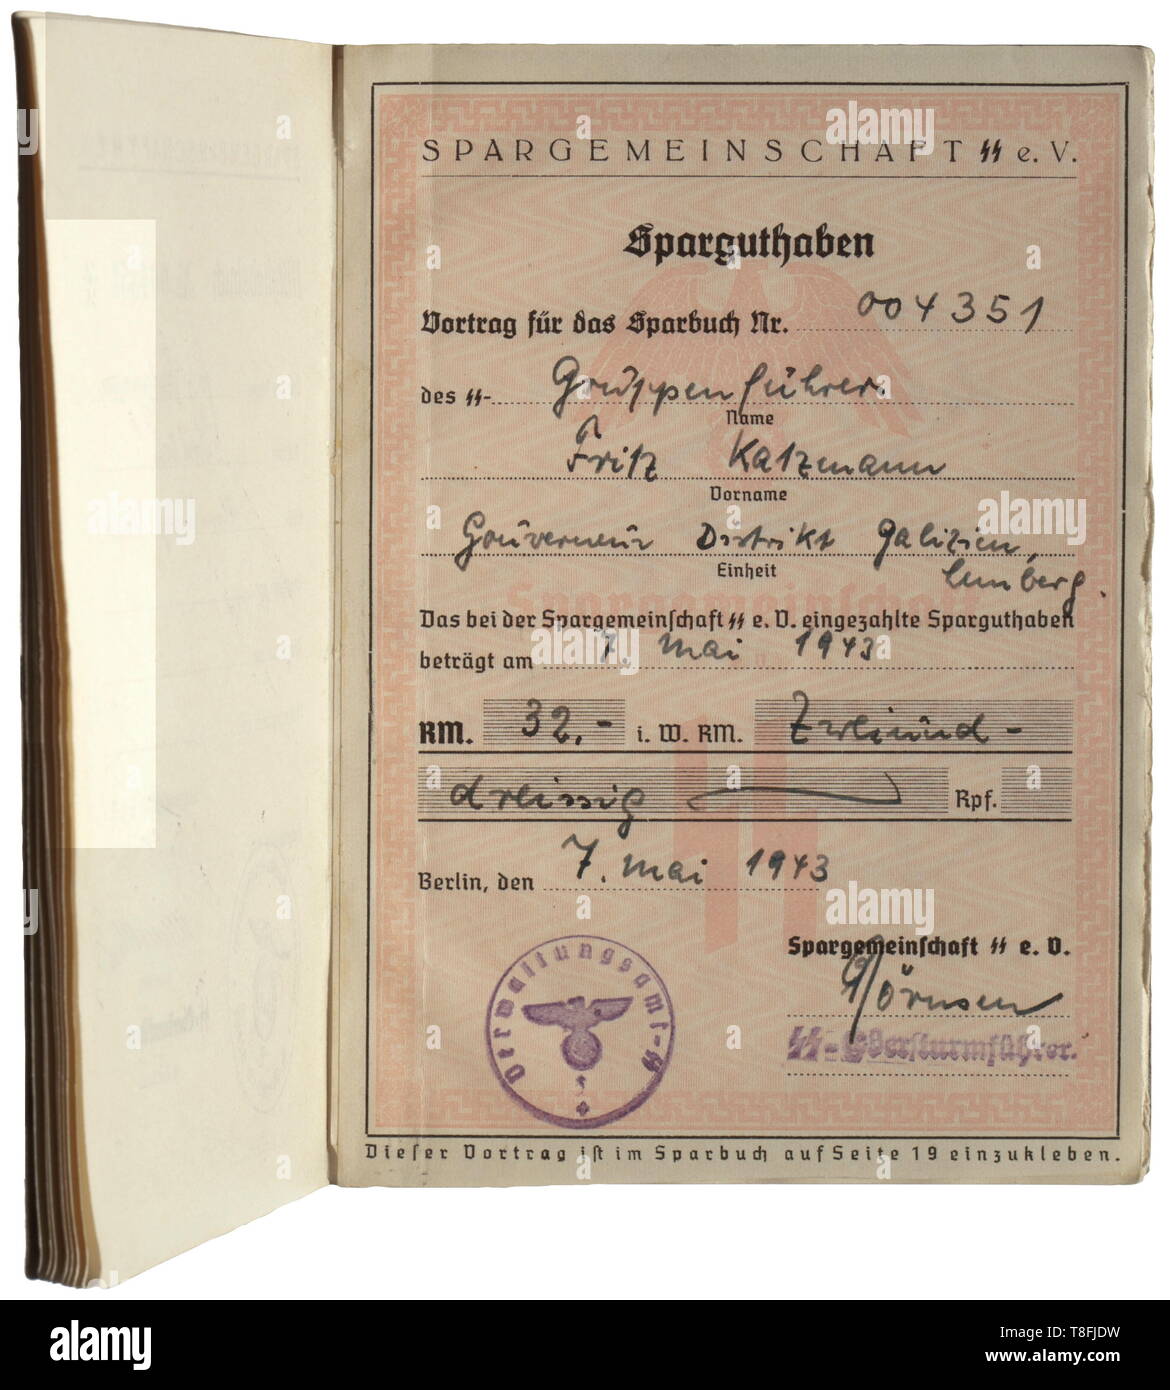 SS-Gruppenführer Fritz Katzmann (1906 - 1957) - an SS savings book With the no. 004351, issued by the registered savings association SS of SS upper section southeast on 1 April 1940 with two savings balance entries and adhered savings stamps from 1940 to 1944. 32 pages, slightly damaged, the obverse holed, signs of age. Fritz Katzmann was a high-ranking SS functionary and occasional member of the People's Court. He was primarily active in Galicia, and was appointed Generalleutnant of the Waffen-SS on 1 July 1944. historic, historical, 20th century, 1930s, 1940s, Waffen-SS, , Editorial-Use-Only Stock Photo